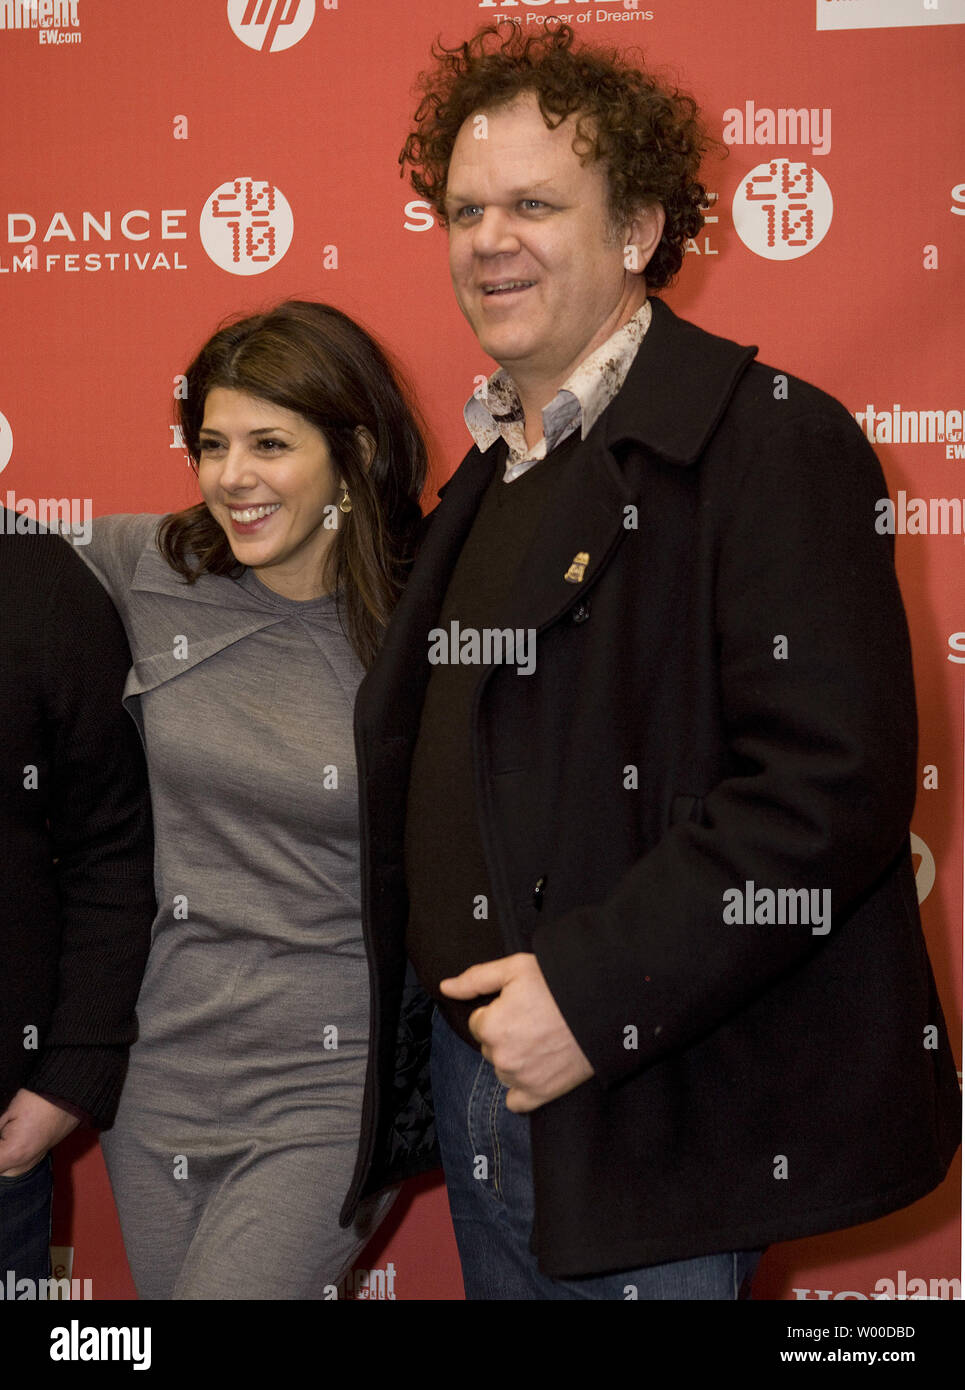 Marisa Tomei and John C Reilly arrive for the world premiere of  "Cyrus" at the 2010 Sundance Film Festival on January 23, 2010 in Park City, Utah.         UPI/Gary C. Caskey.. Stock Photo